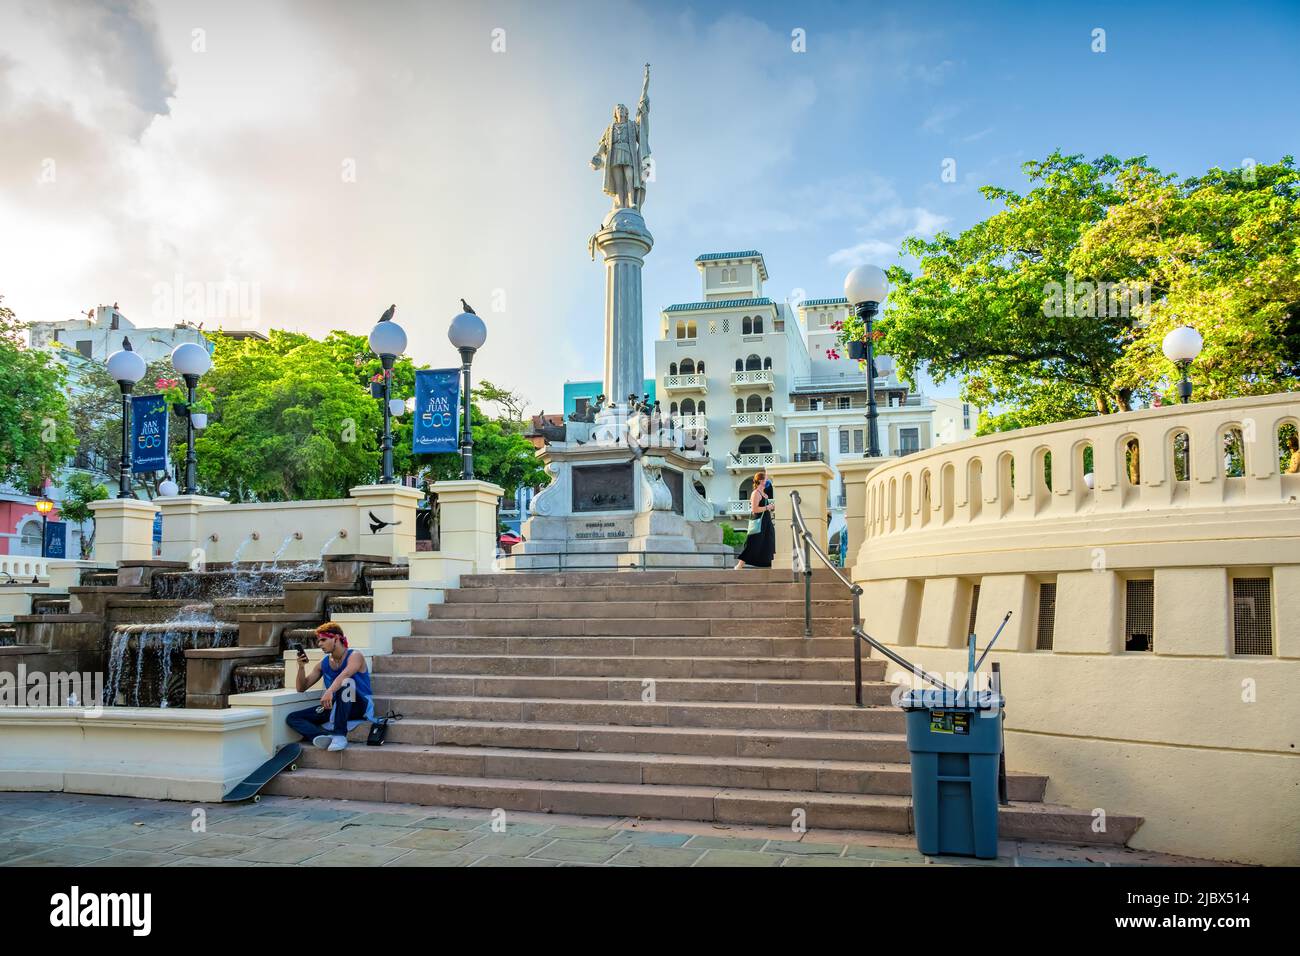 People sit and walk on Plaza Colón in Old San Juan, Puerto Rico on a sunny day. Stock Photo